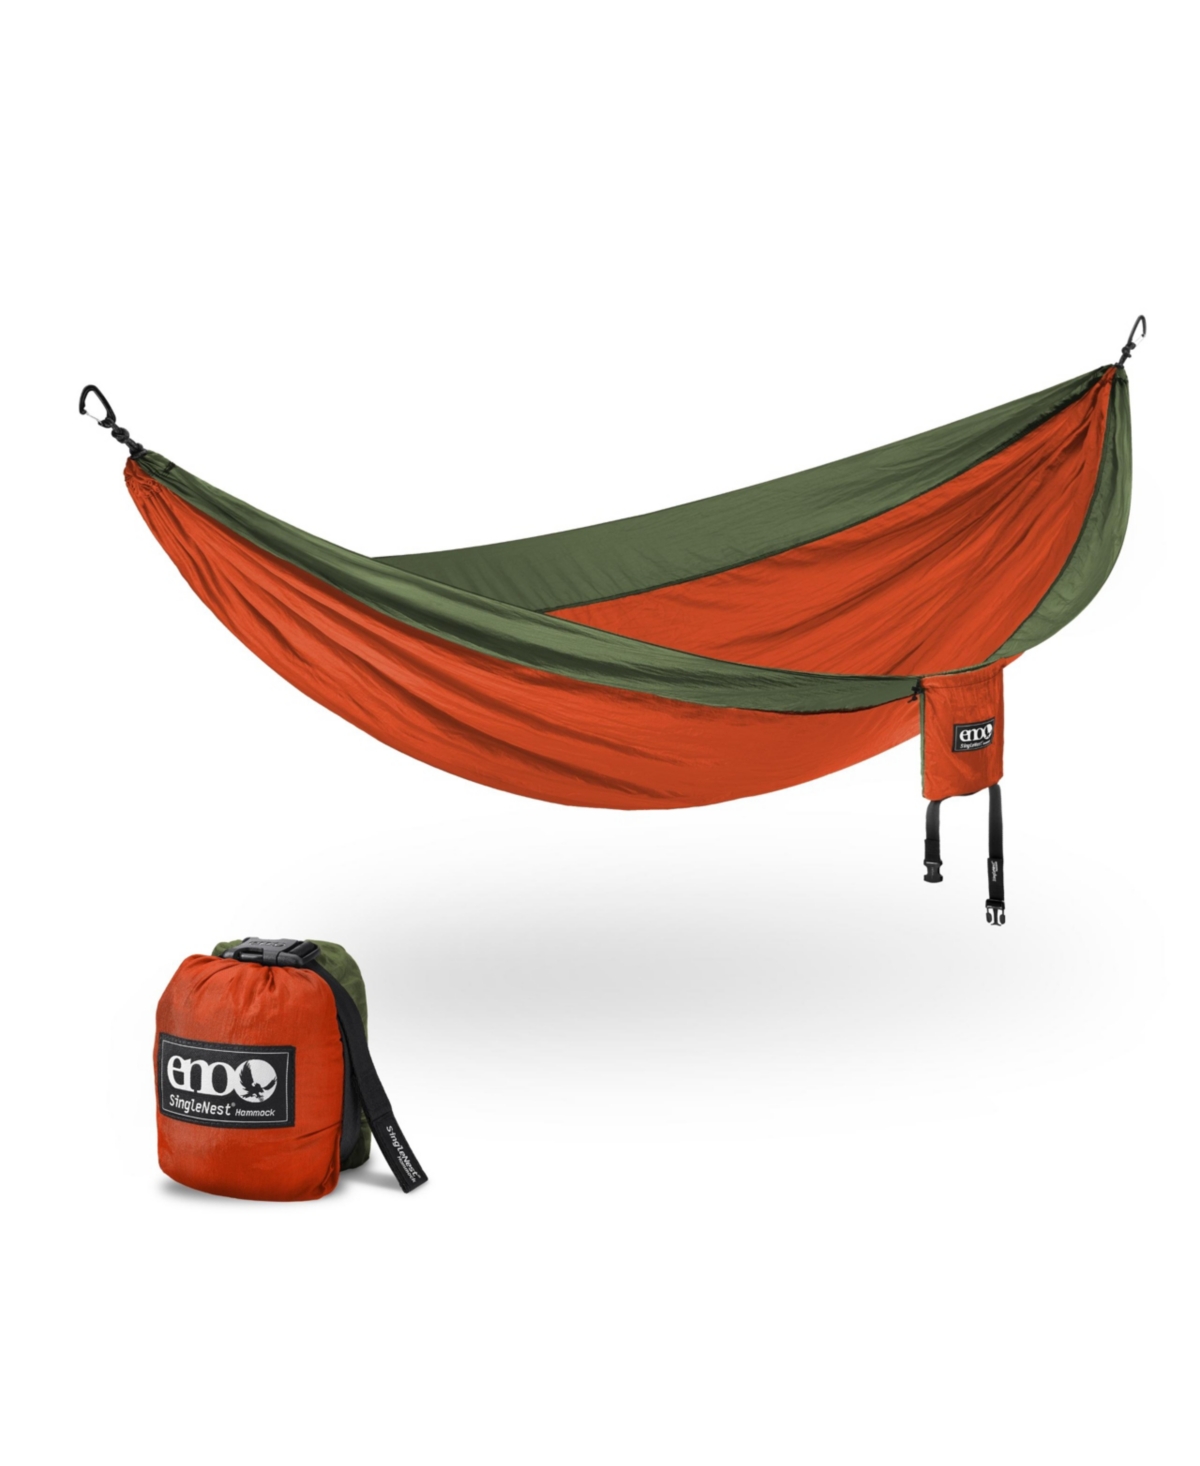 SingleNest Hammock - Lightweight, 1 Person Portable Hammock - For Camping, Hiking, Backpacking, Travel, a Festival, or the Beach - Orange/Olive -